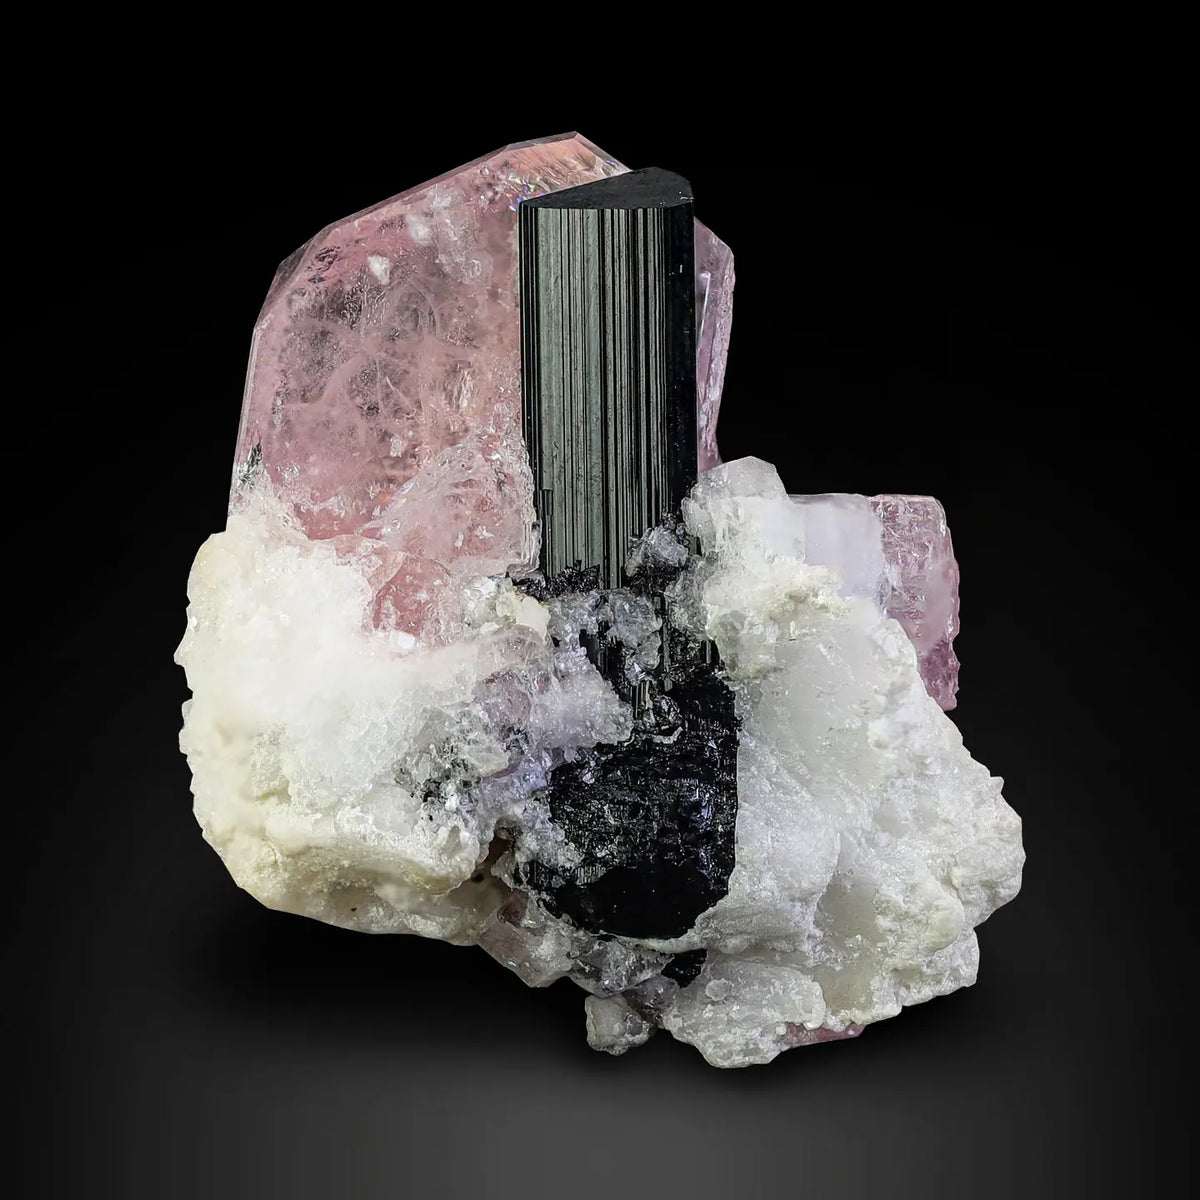 Fabulous Eye-catching Pink Tabular Apatite with Schorl on White Albite from Pakistan